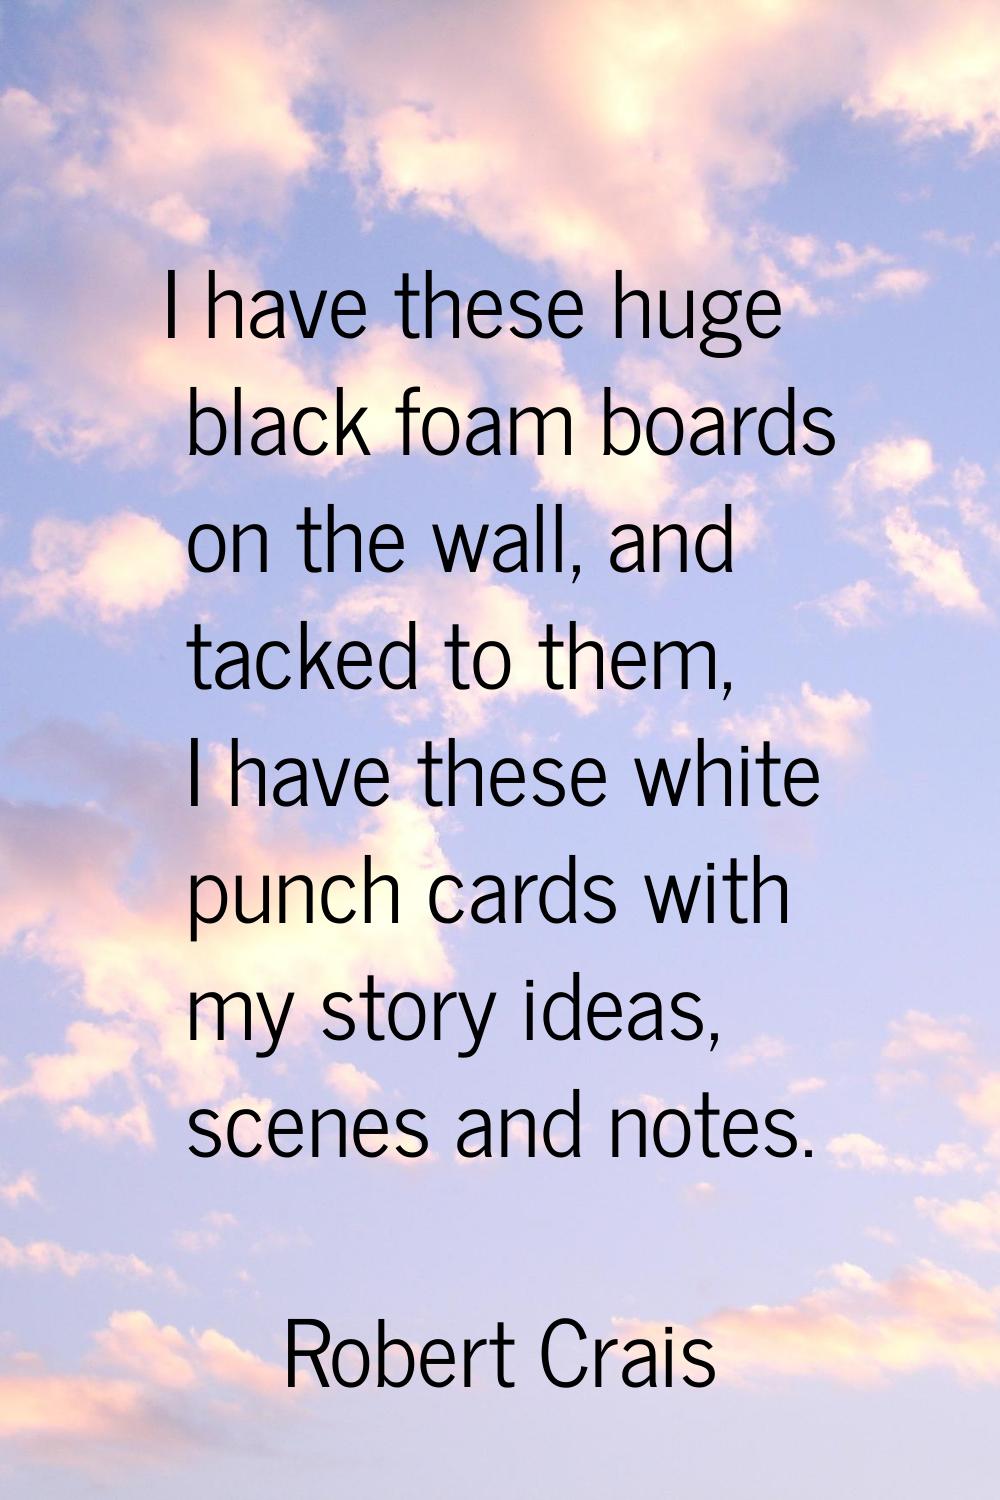 I have these huge black foam boards on the wall, and tacked to them, I have these white punch cards